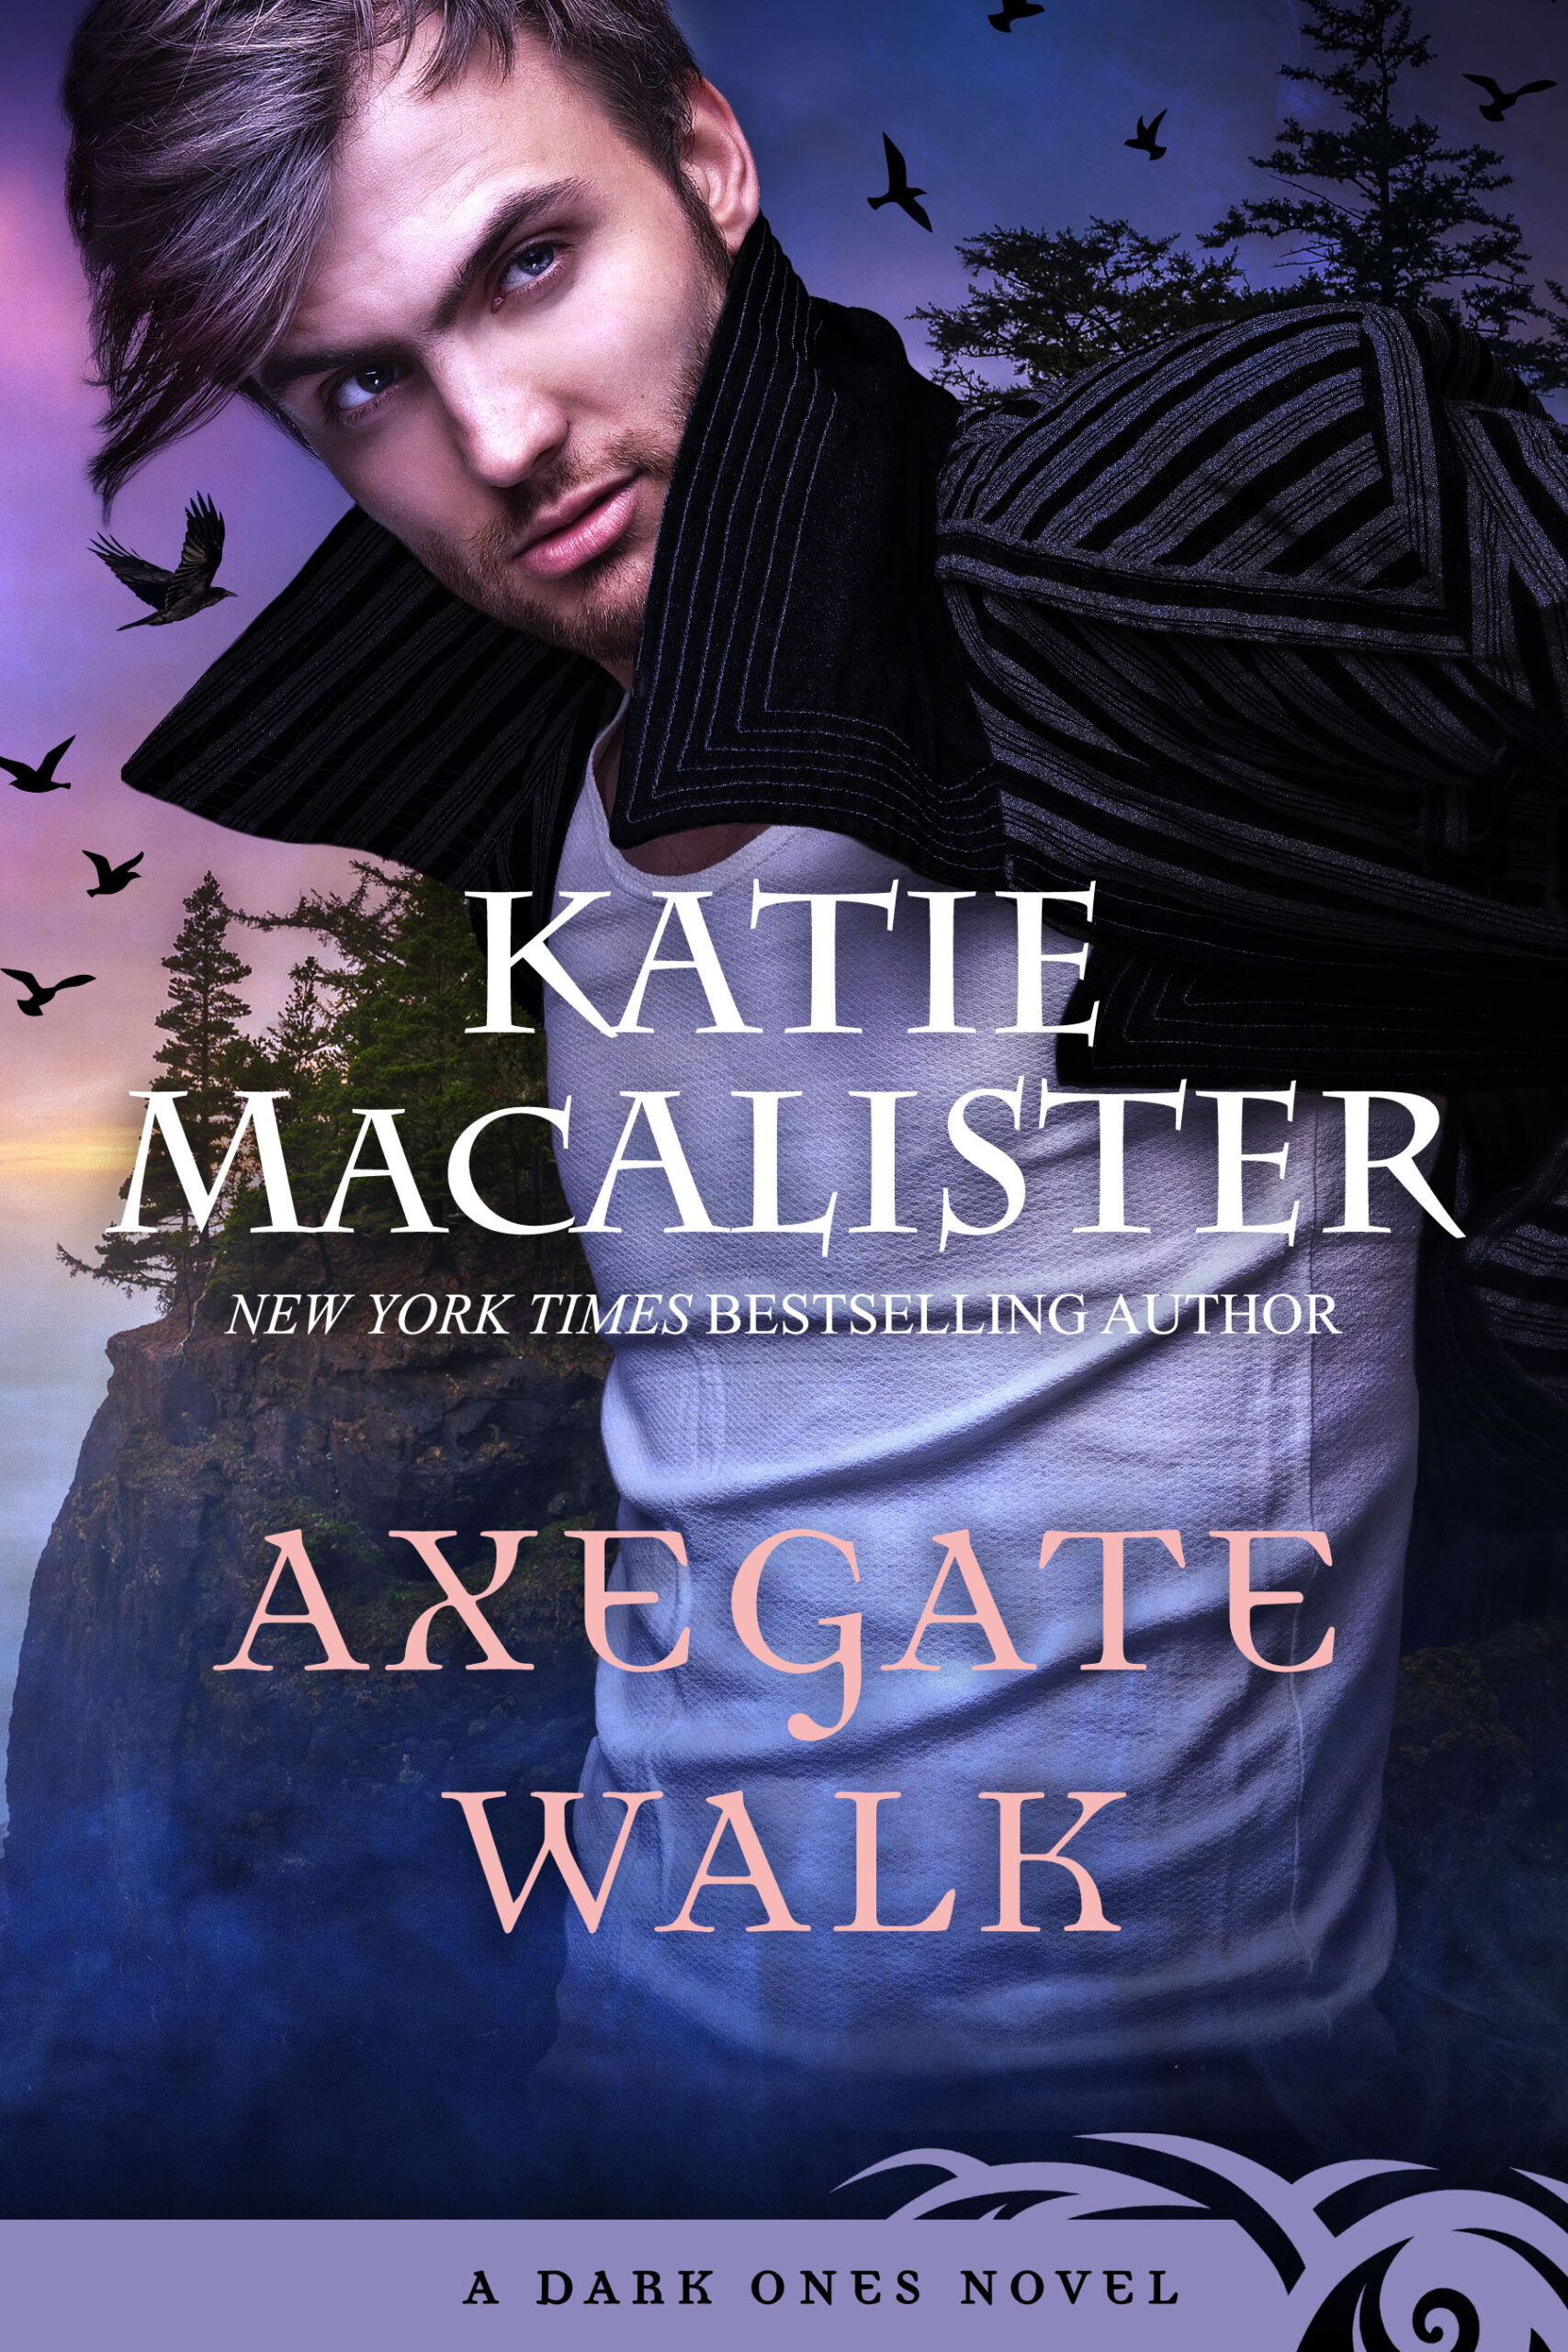 Axegate Walk by Katie MacAlister PDF Download